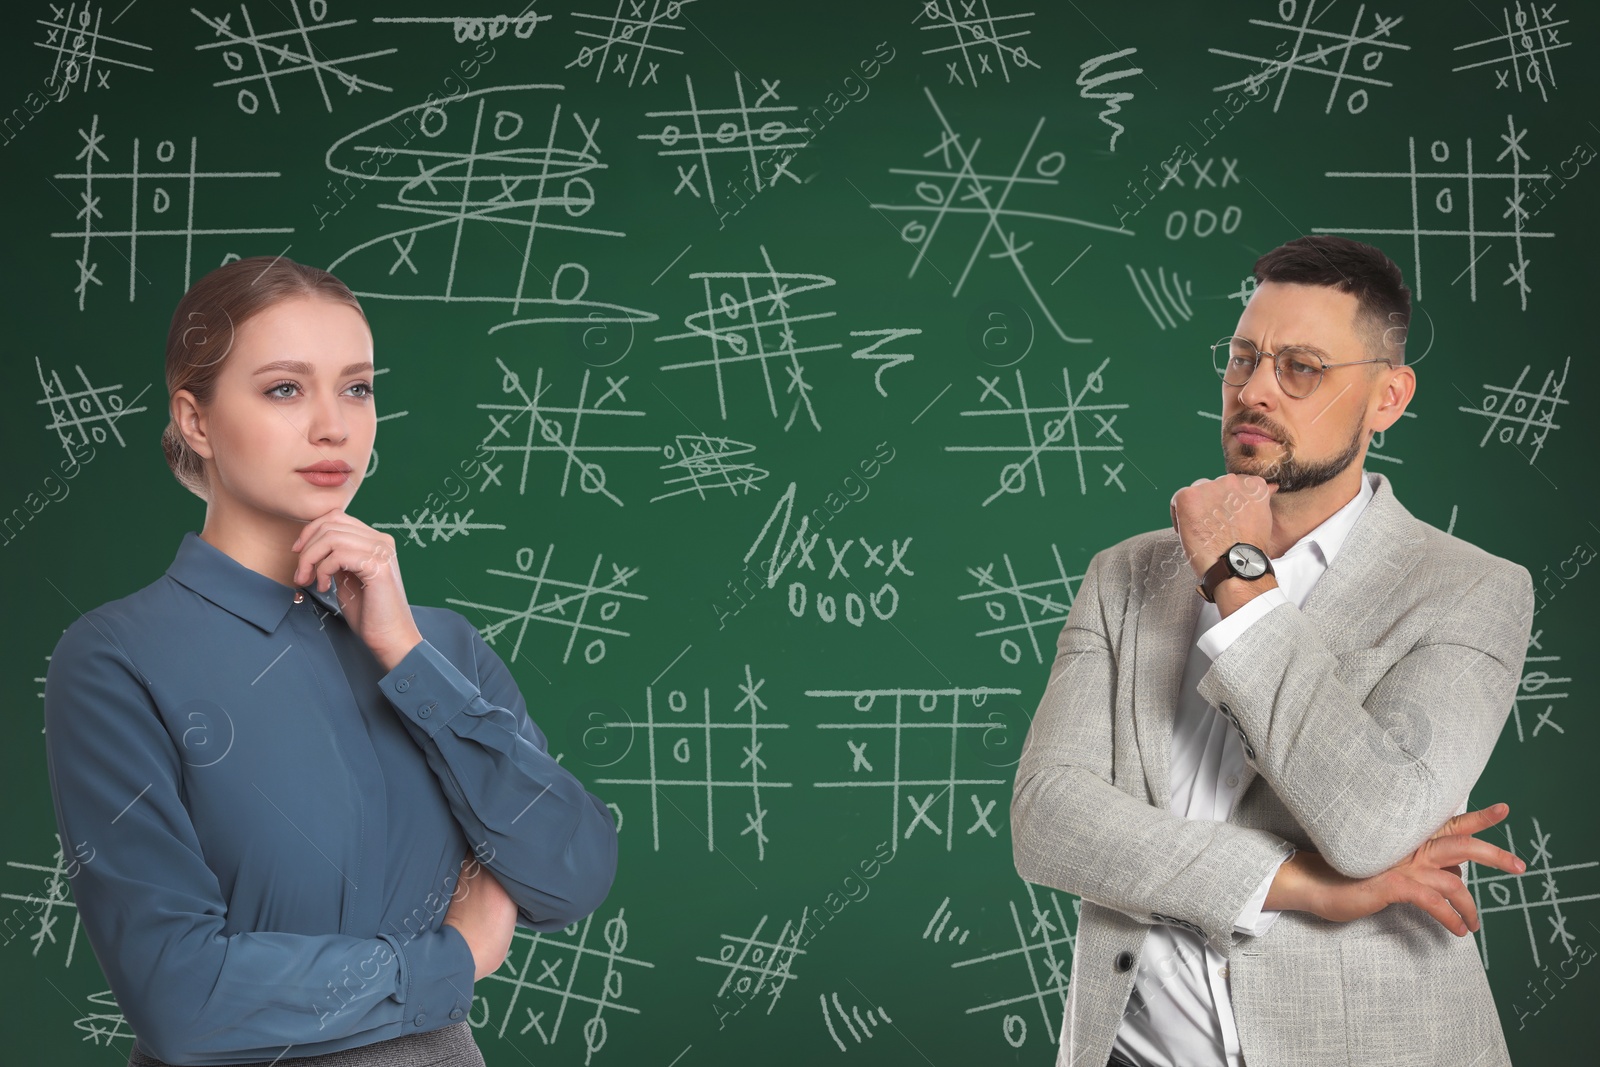 Image of Businesspeople near green chalkboard with drawn tic tac toe game 